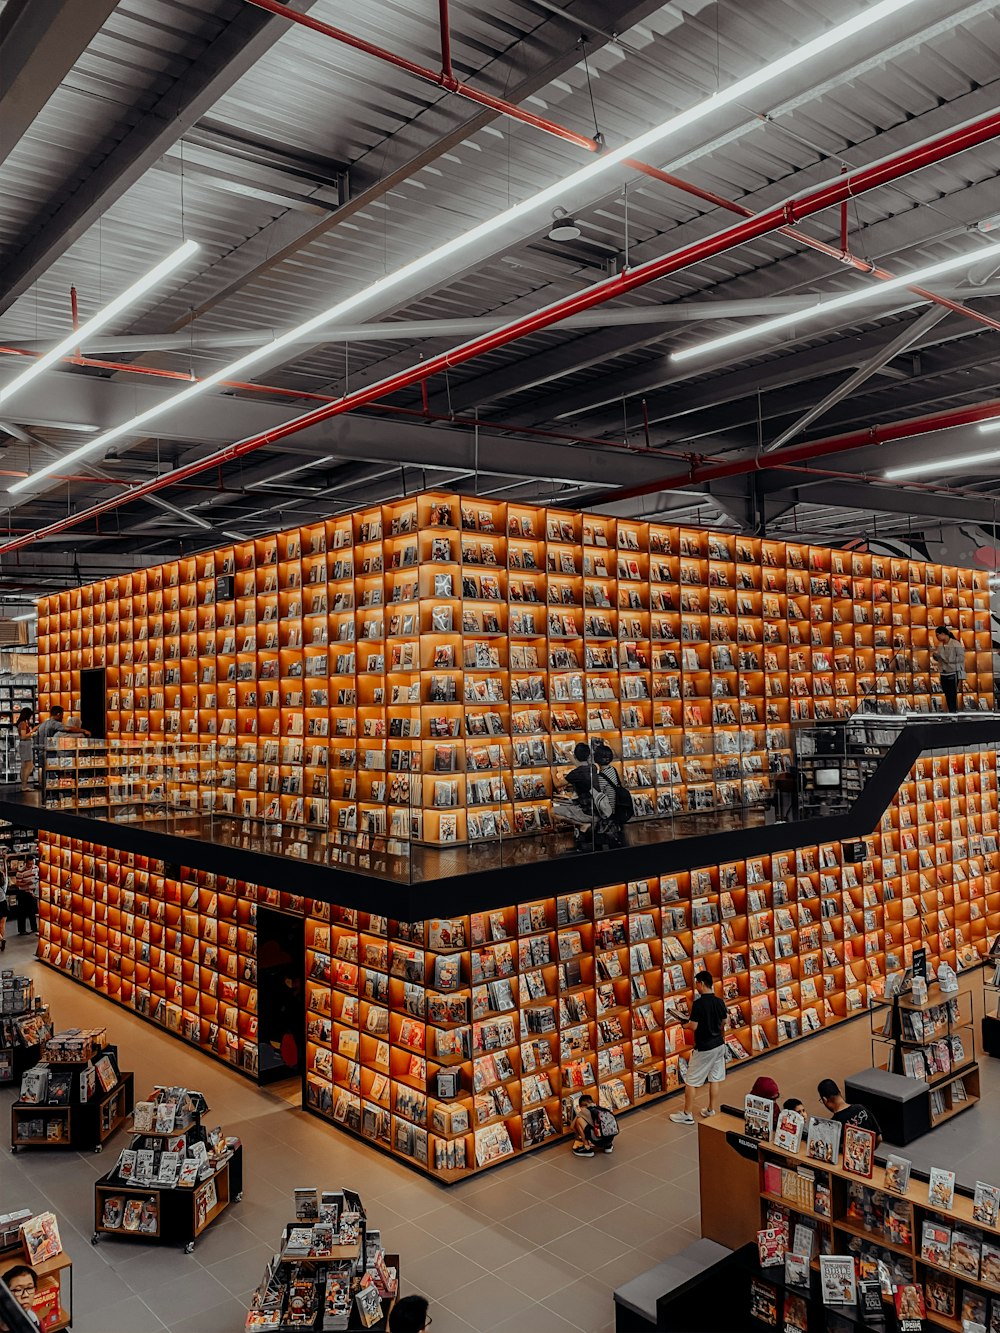 Amazon Warehouse Pictures | Download Free Images on Unsplash